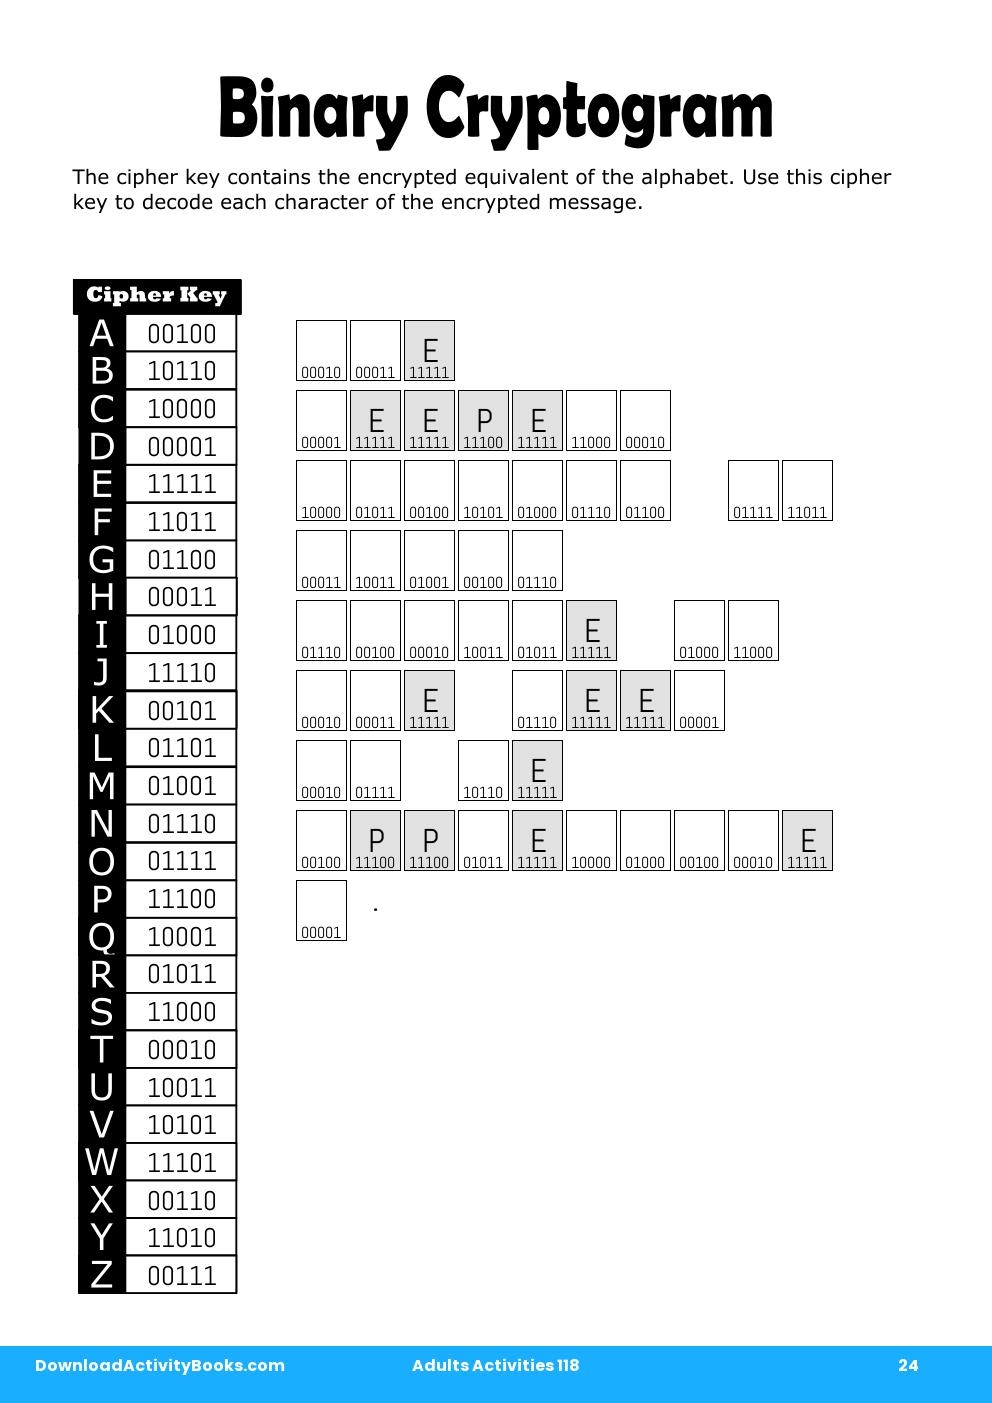 Binary Cryptogram in Adults Activities 118